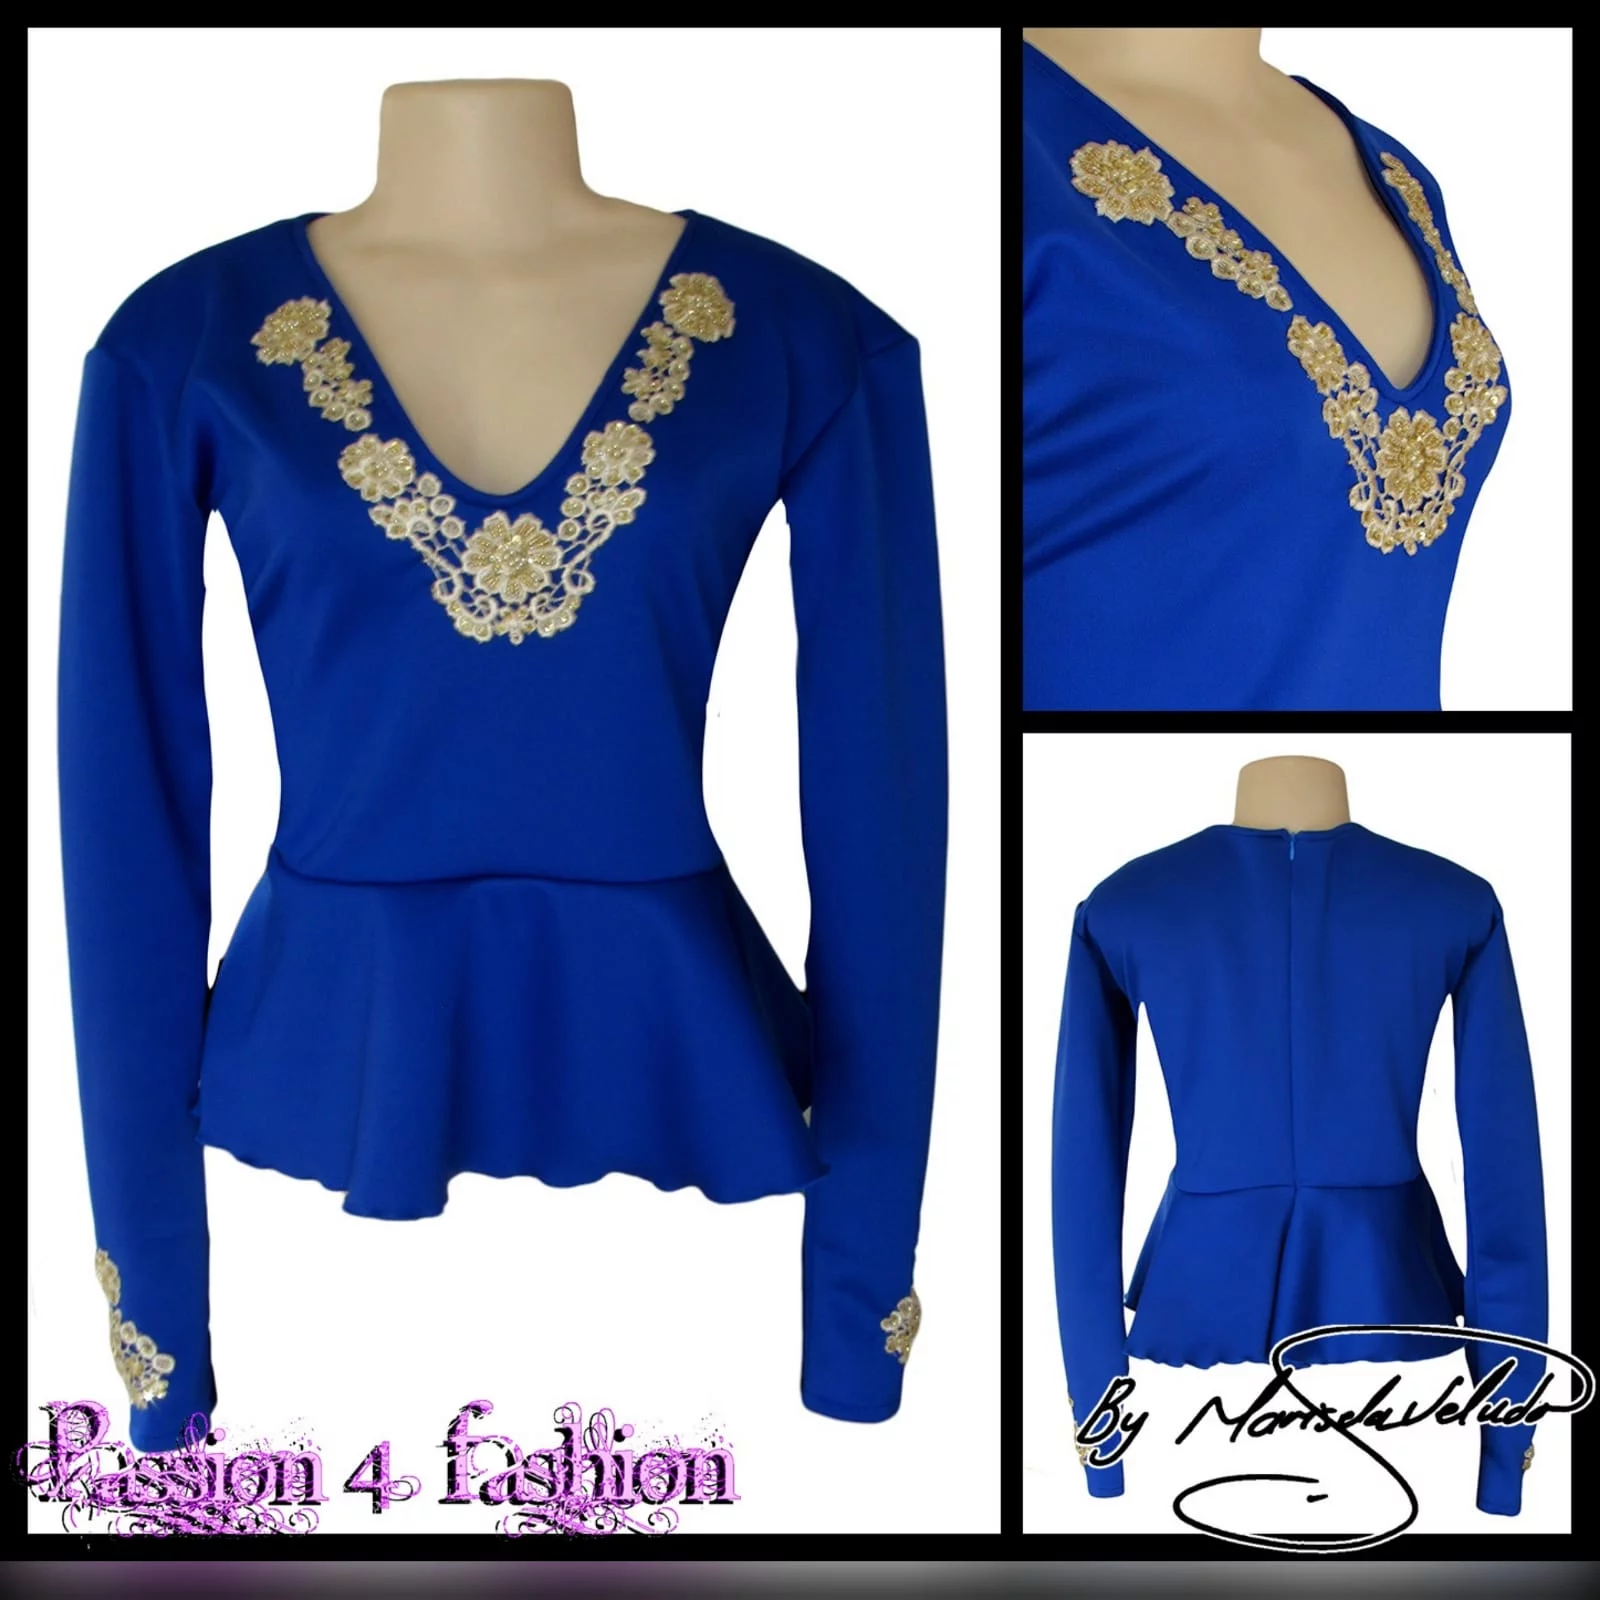 Royal blue & gold peplum smart casual top 2 royal blue & gold peplum smart casual top, long sleeves, v neckline & cuffs detailed with gold beaded lace